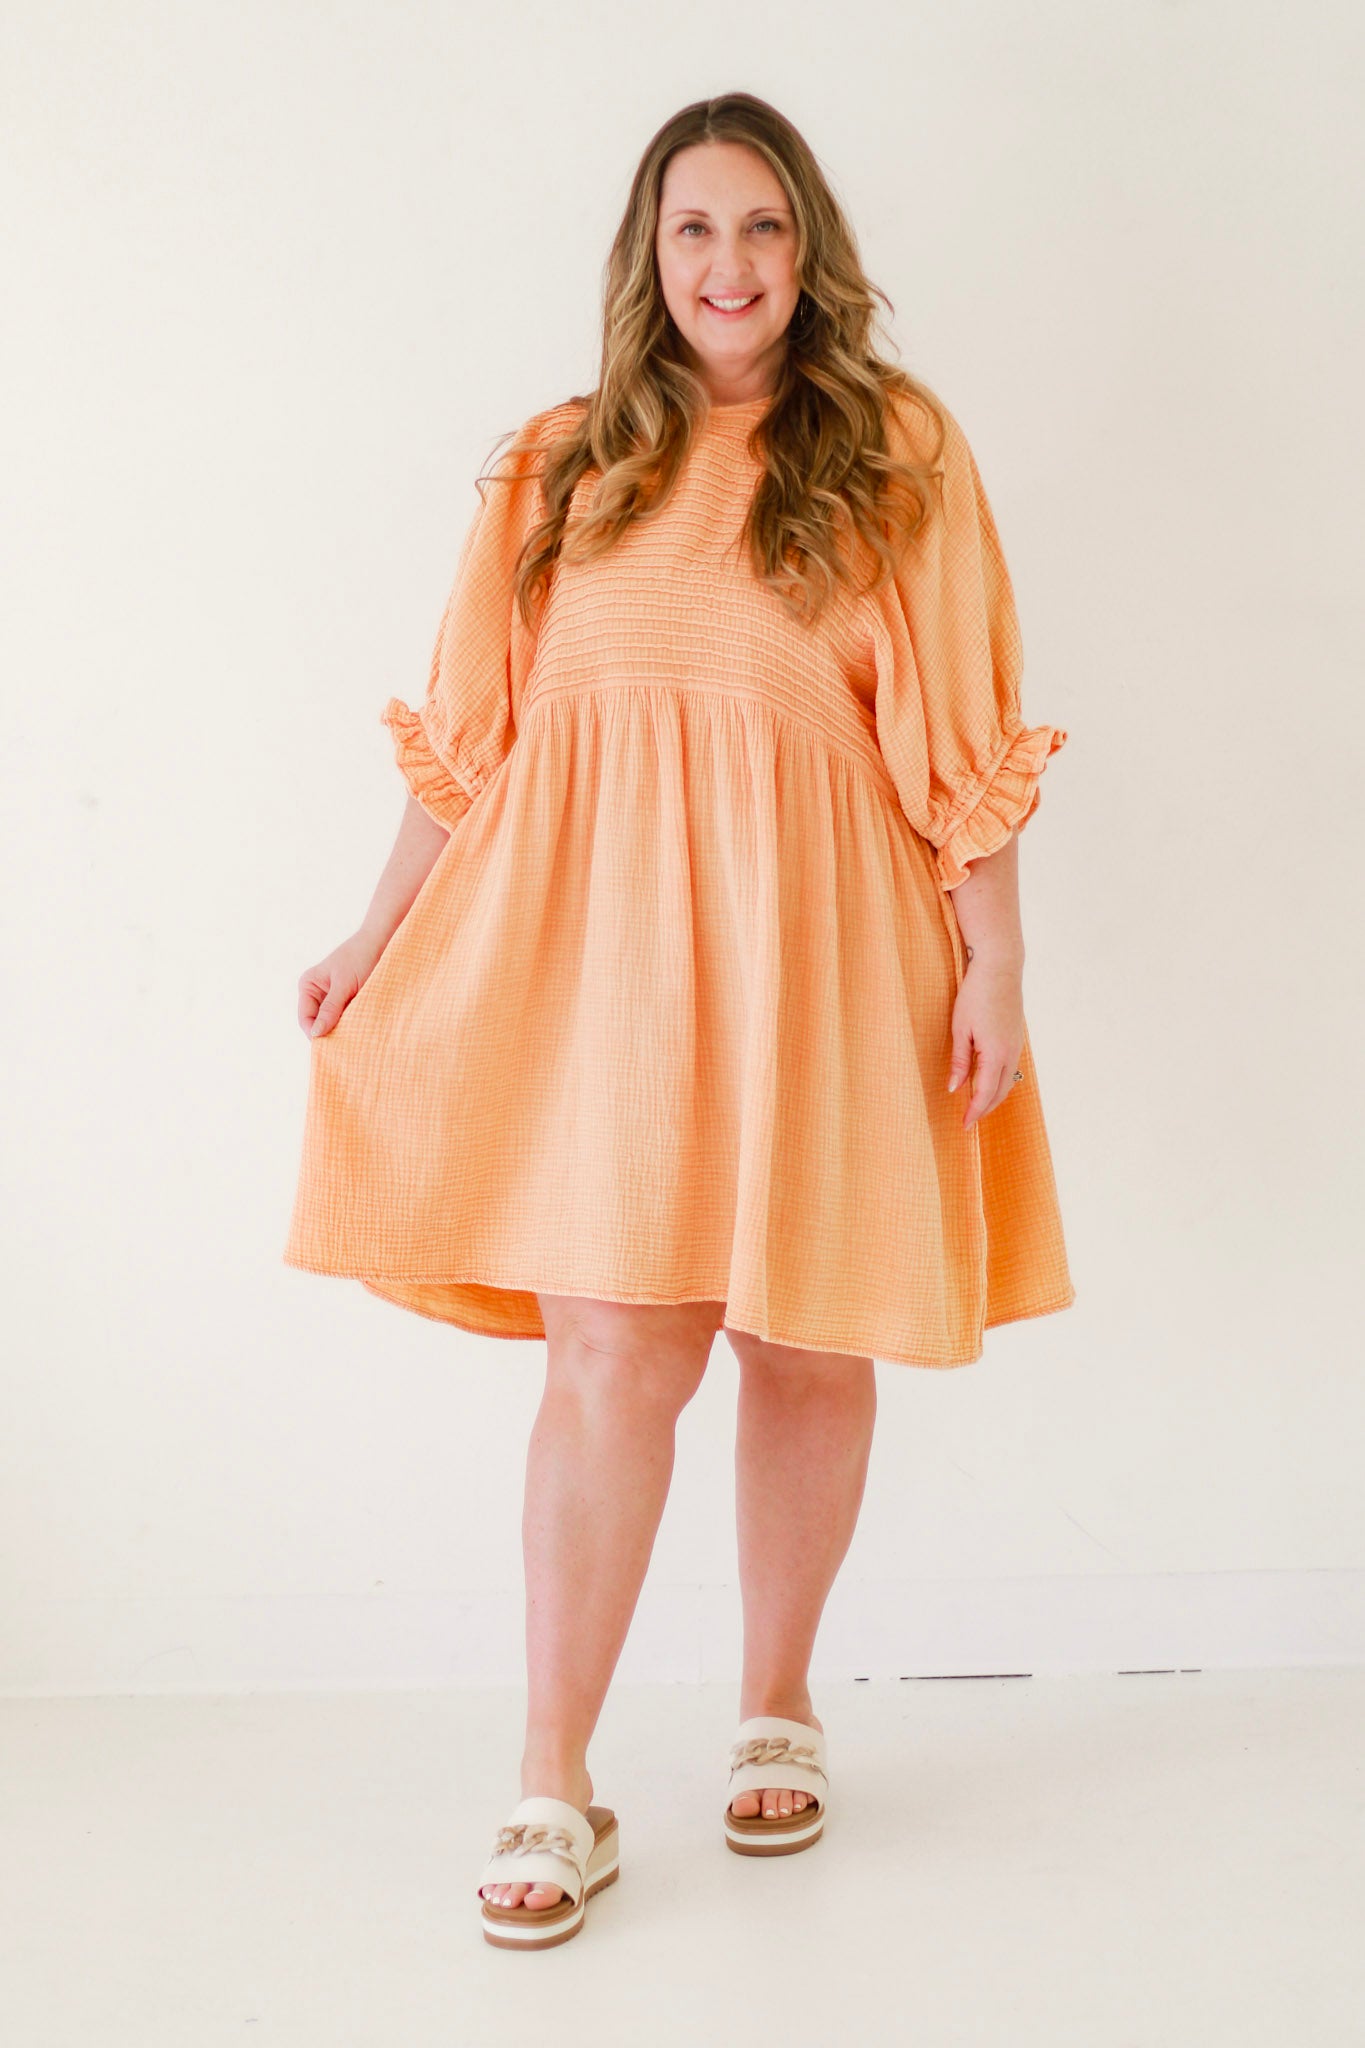 Time to Breathe Dress in Tangerine - Allure Clothing Boutique